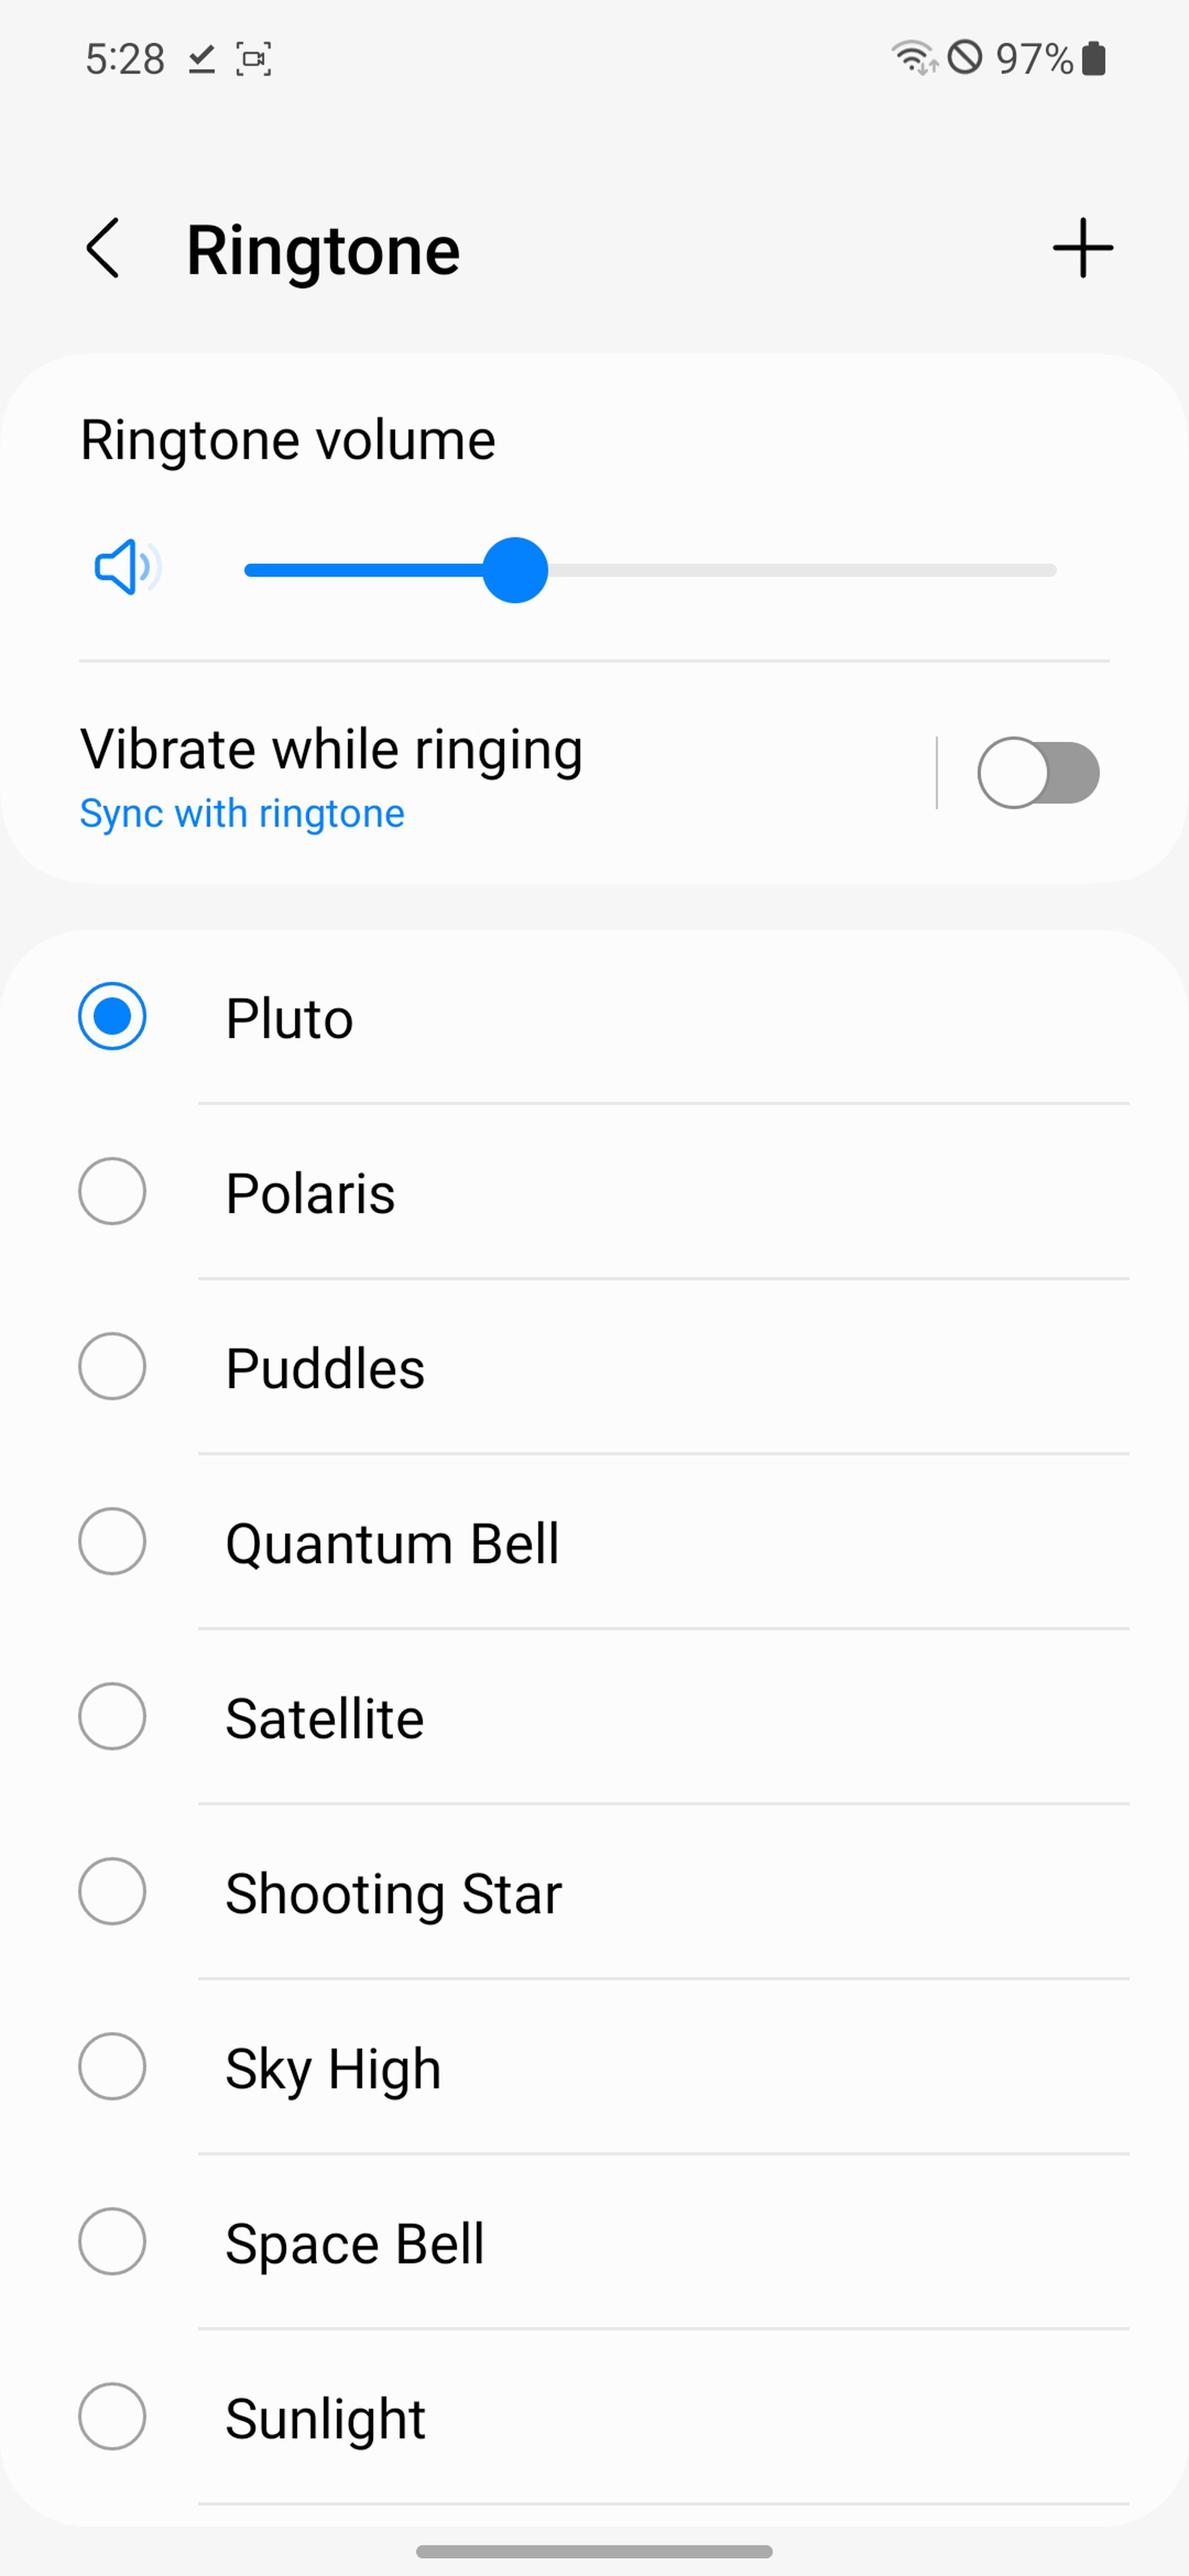 Ringtone page with list of sounds.